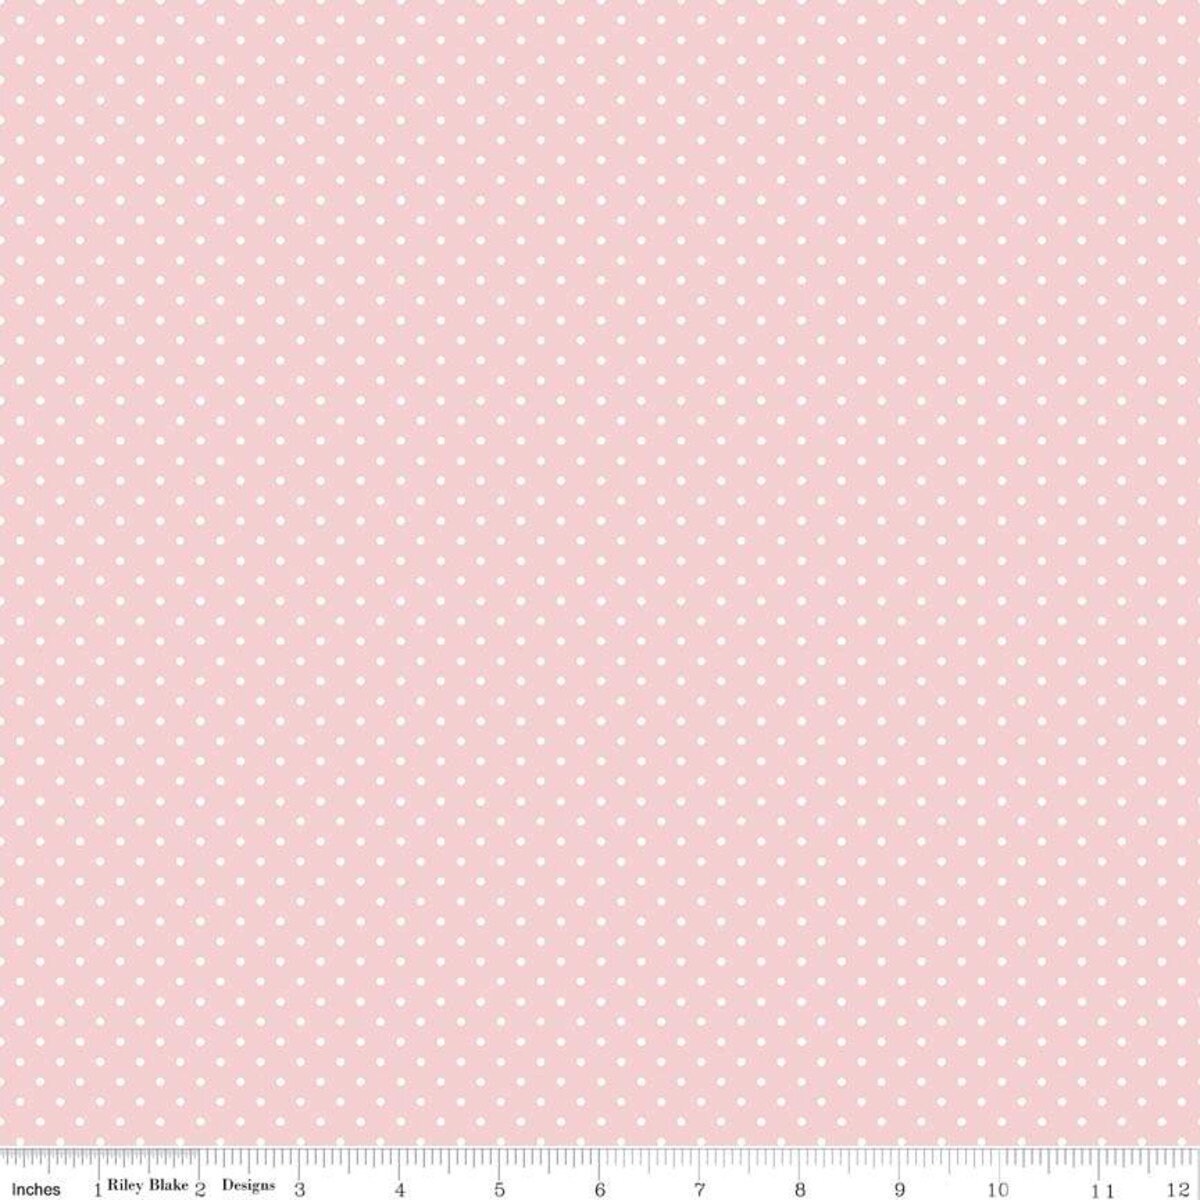 Swiss Dots Baby Pink Fabric - Riley Blake Designs C670BABYPINK, White on Pink Dots Fabric, Pink and White Blender Fabric By the Yard